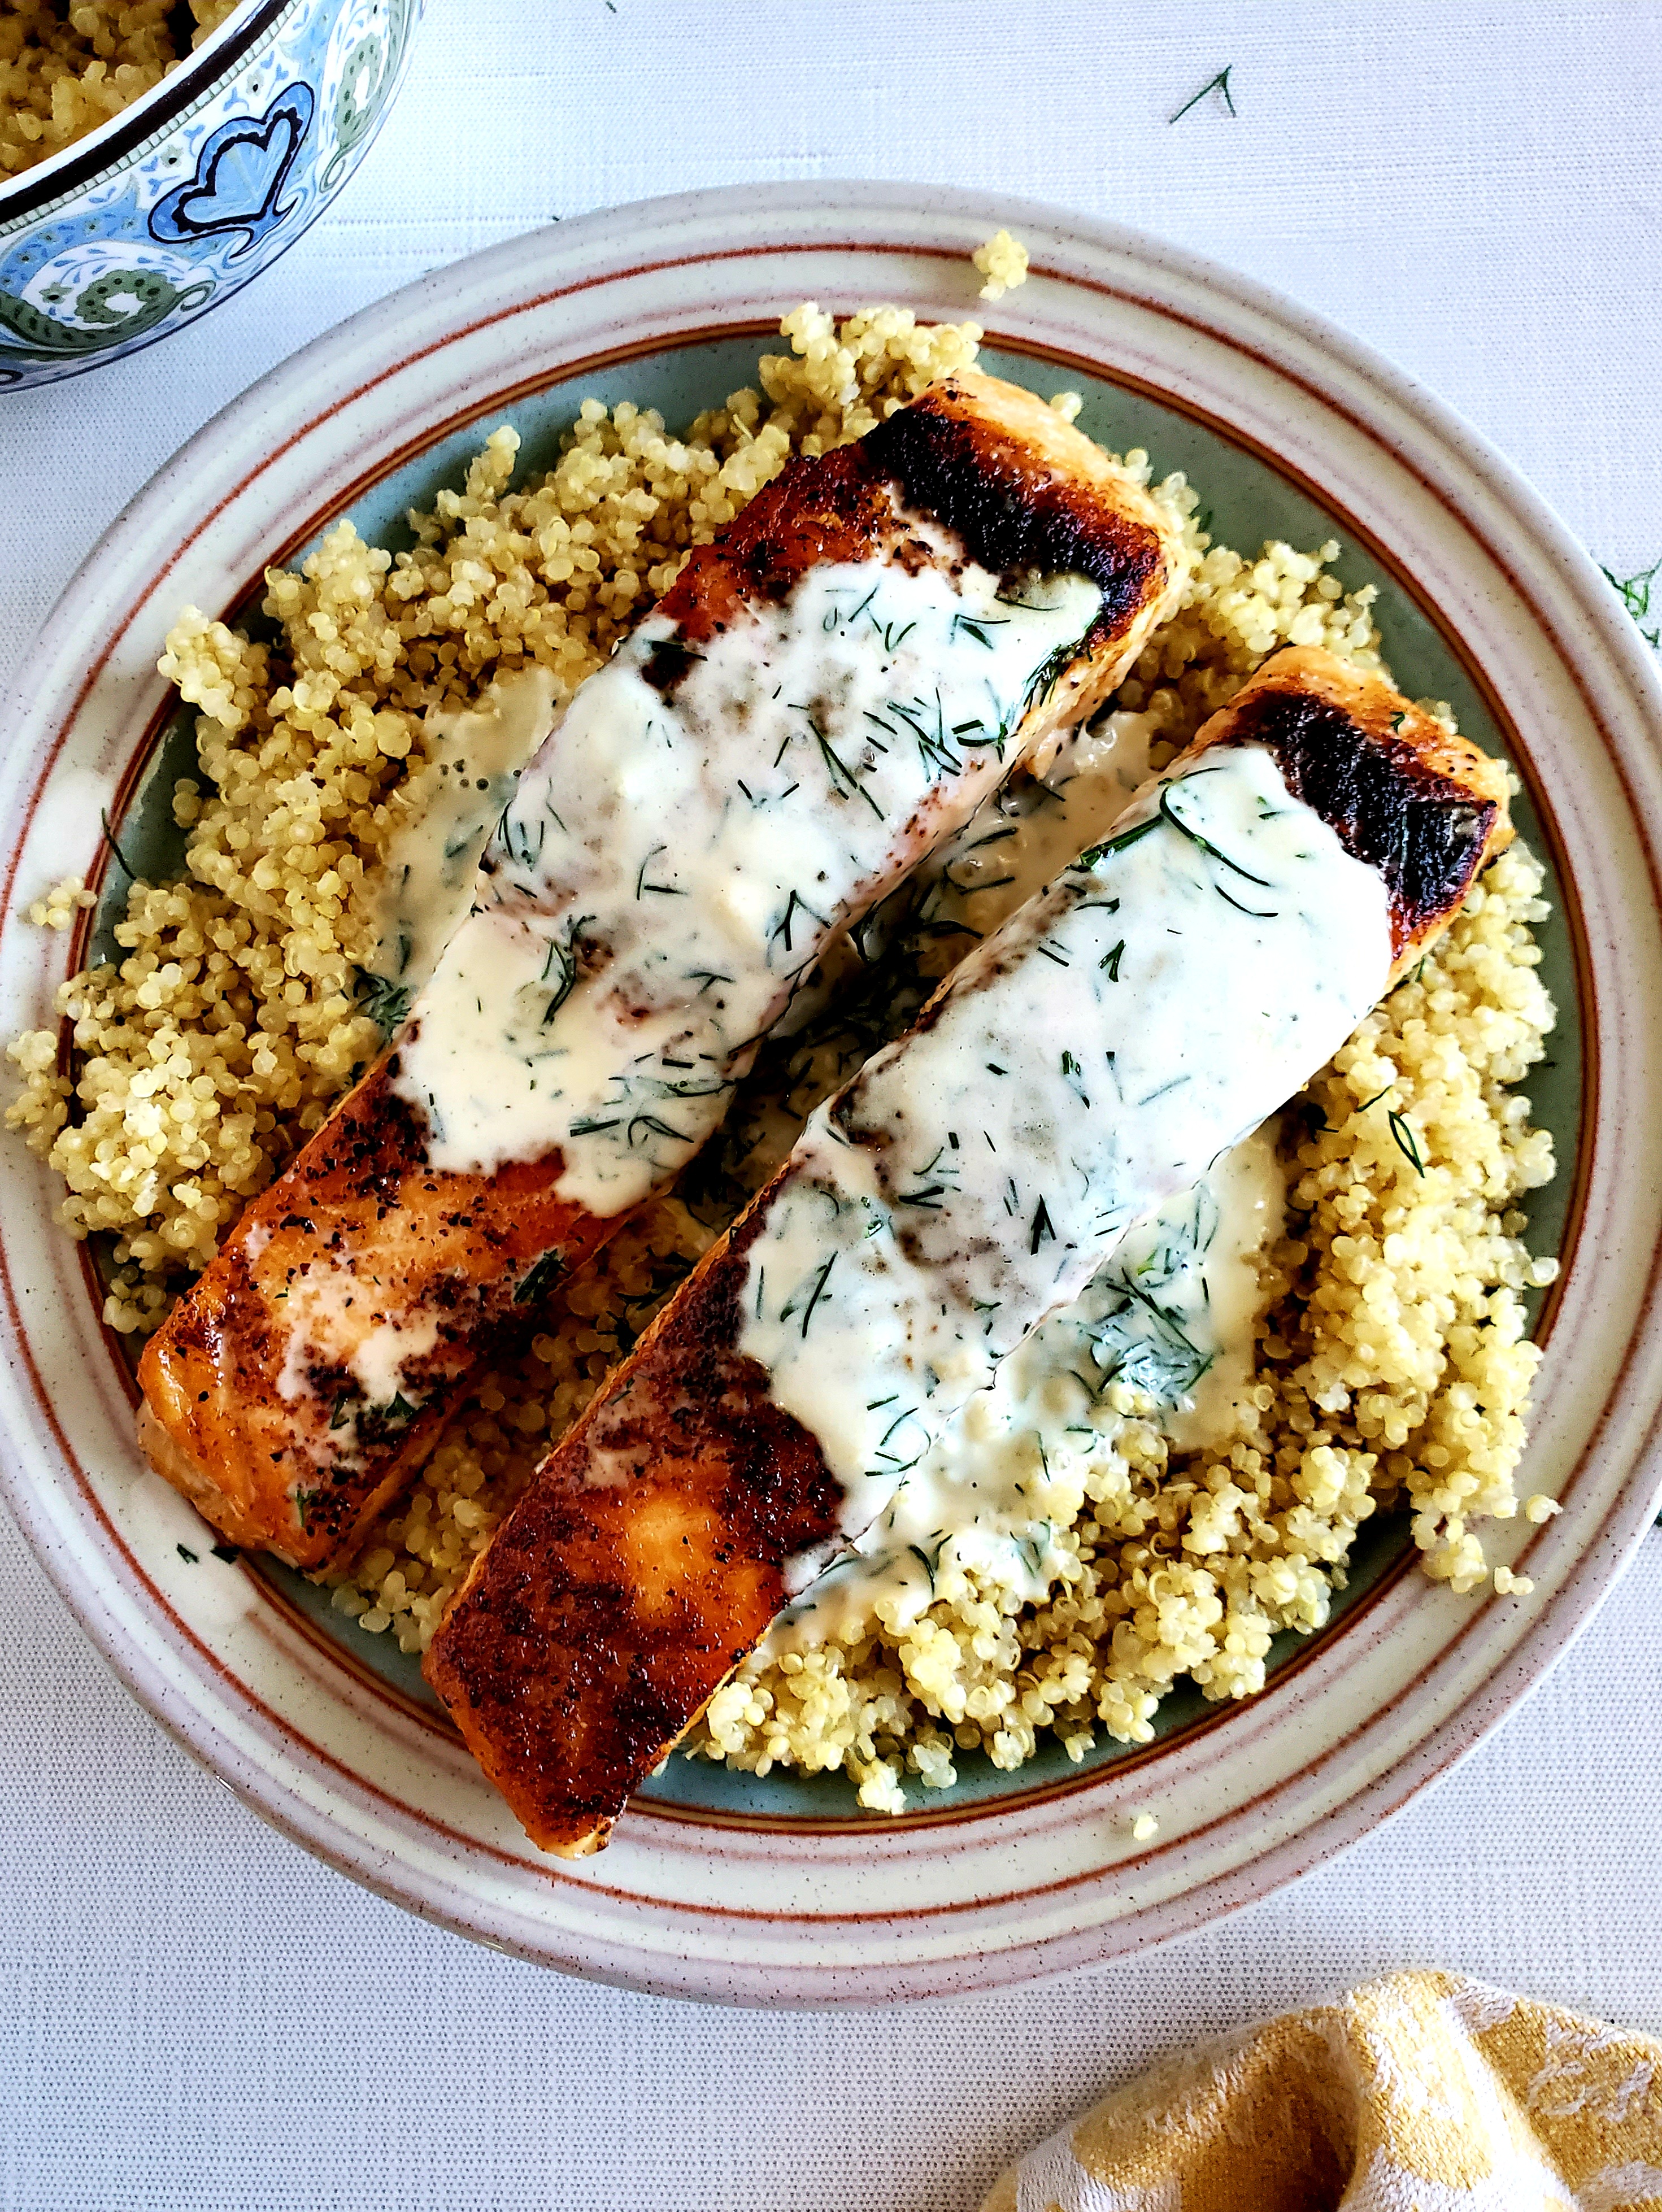 Salmon with Creamy Dill Sauce (Recipe Inspired by THE LOST VILLAGE)